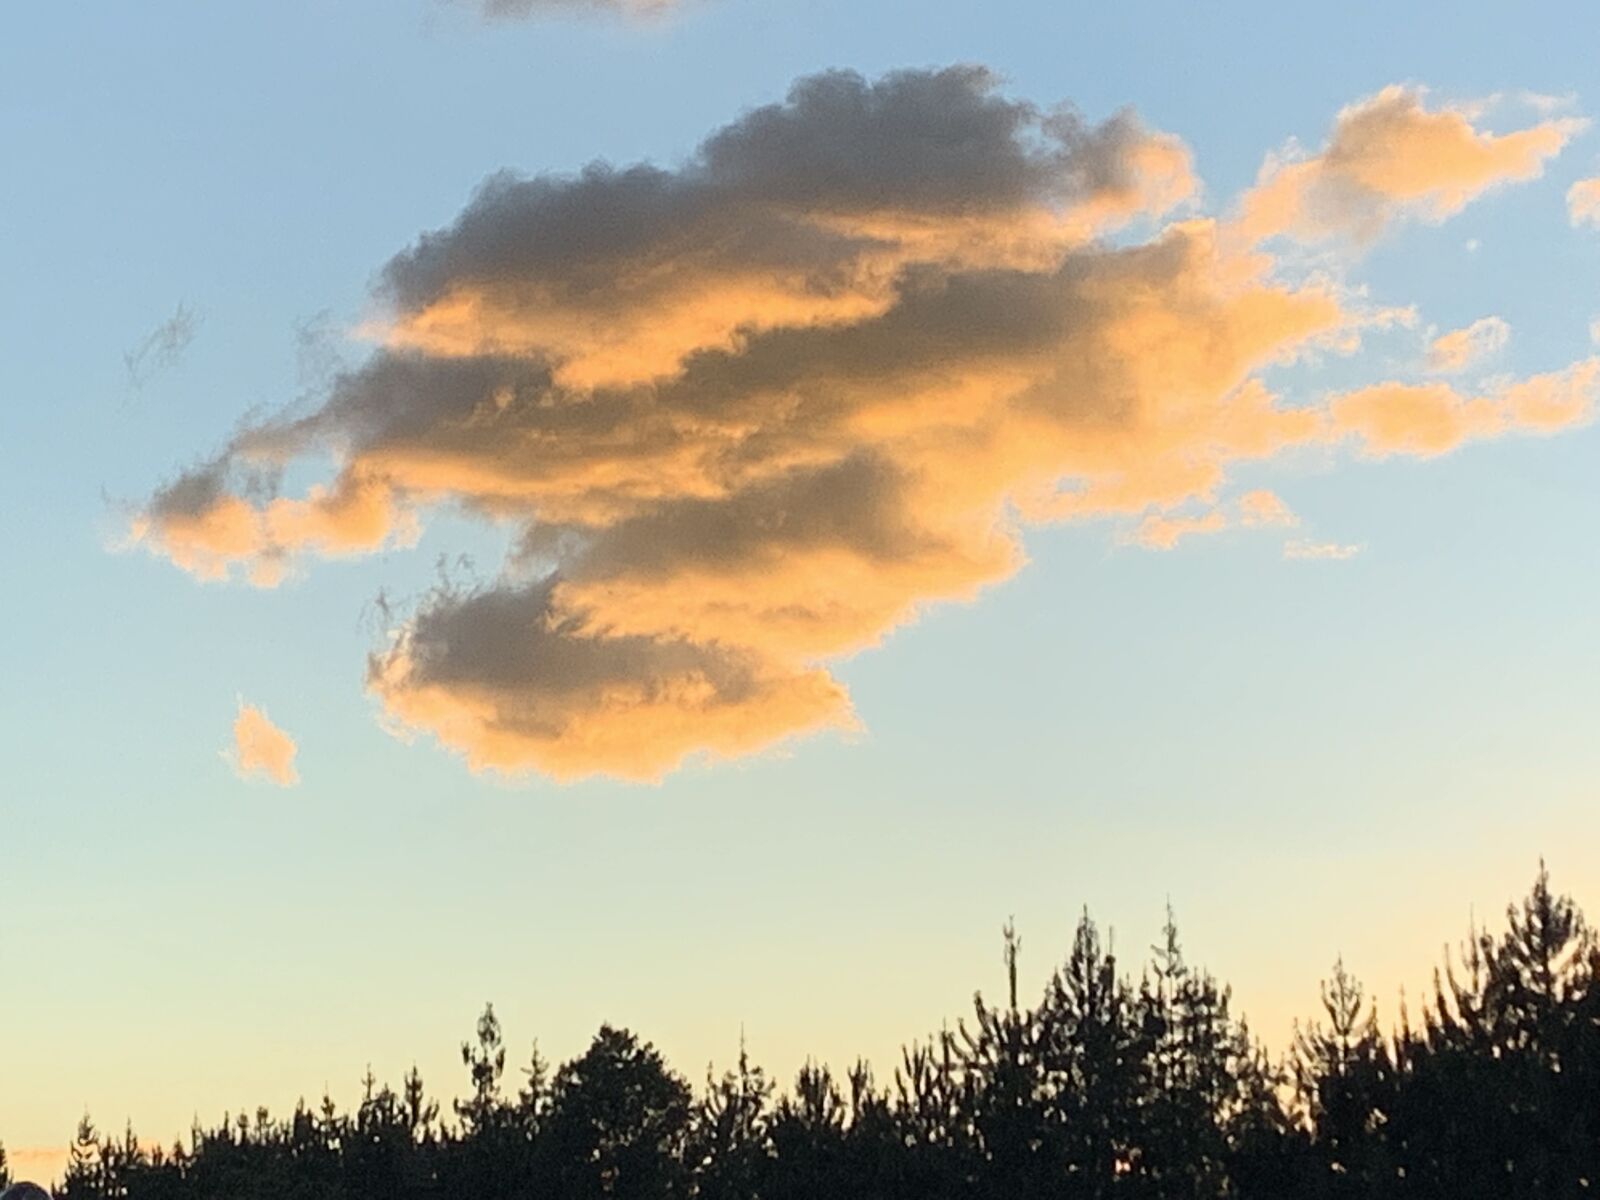 Apple iPhone XR sample photo. Clouds, sky, landscape photography